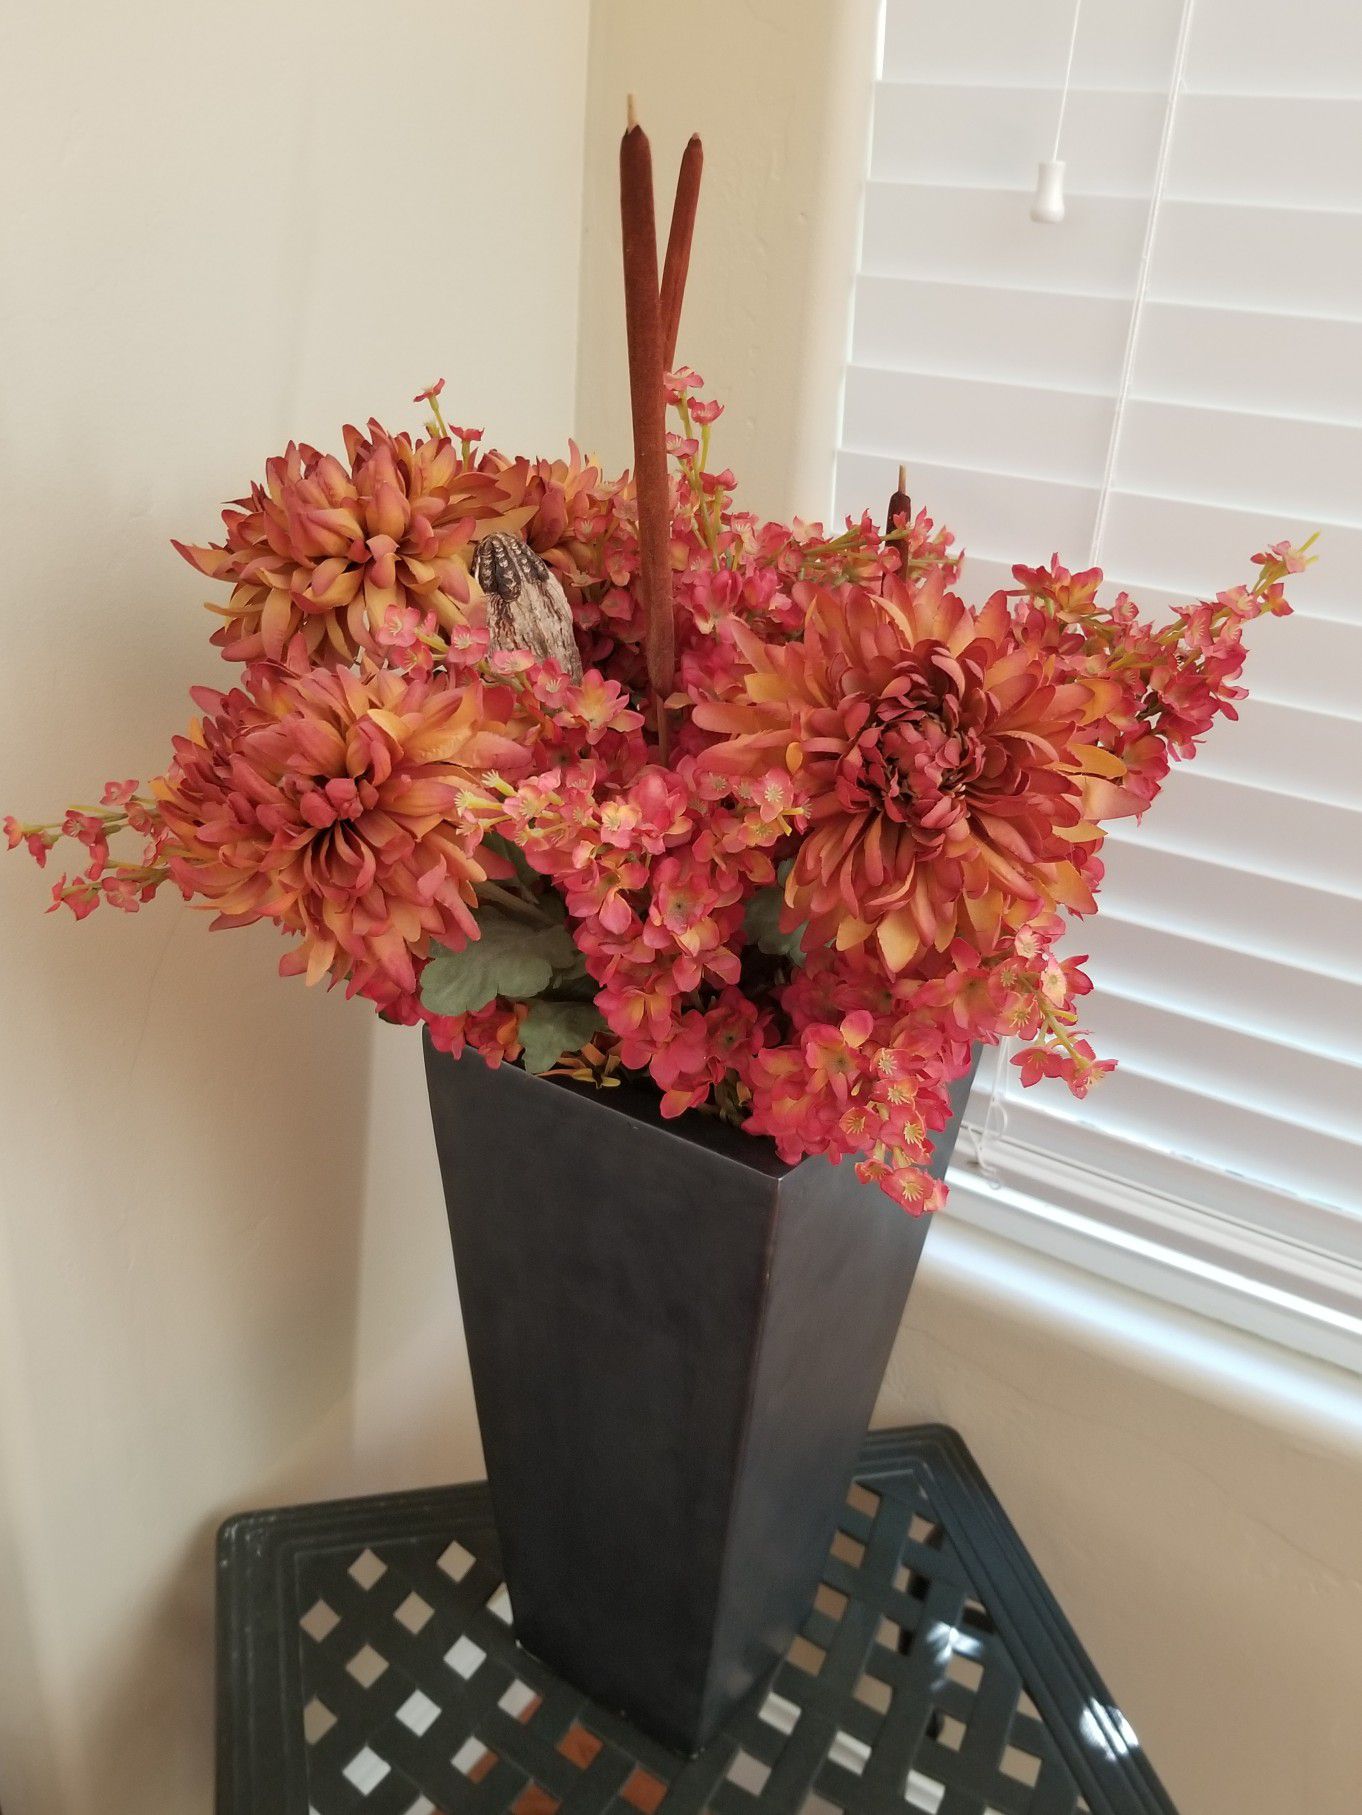 Artificial flowers and vase